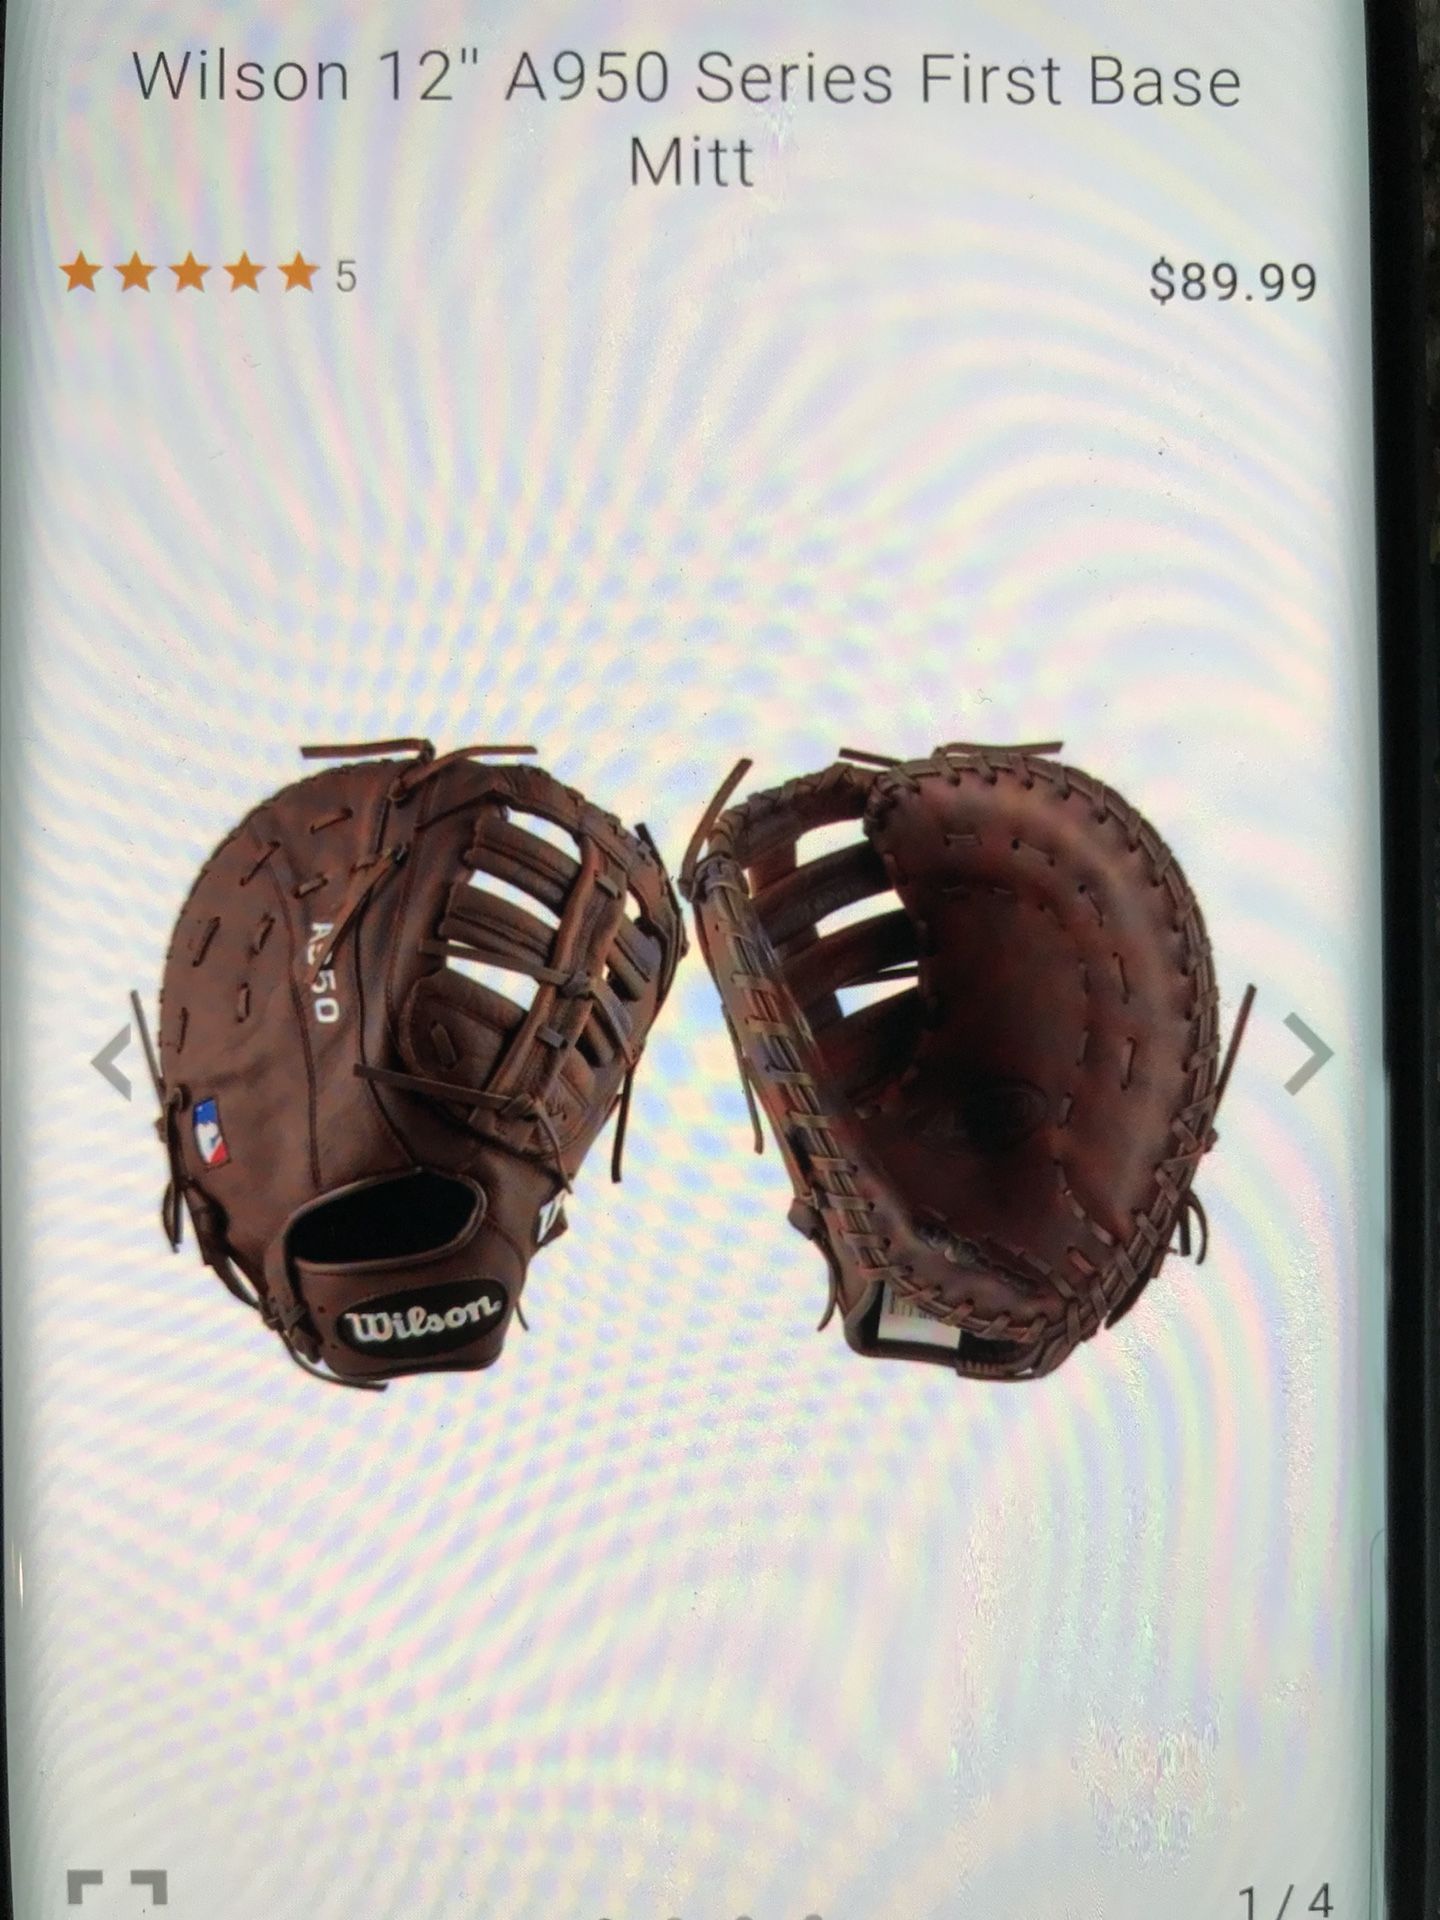 NEW Wilson 12” A950 Series First Baseball Gloves For $50 Firm!!!